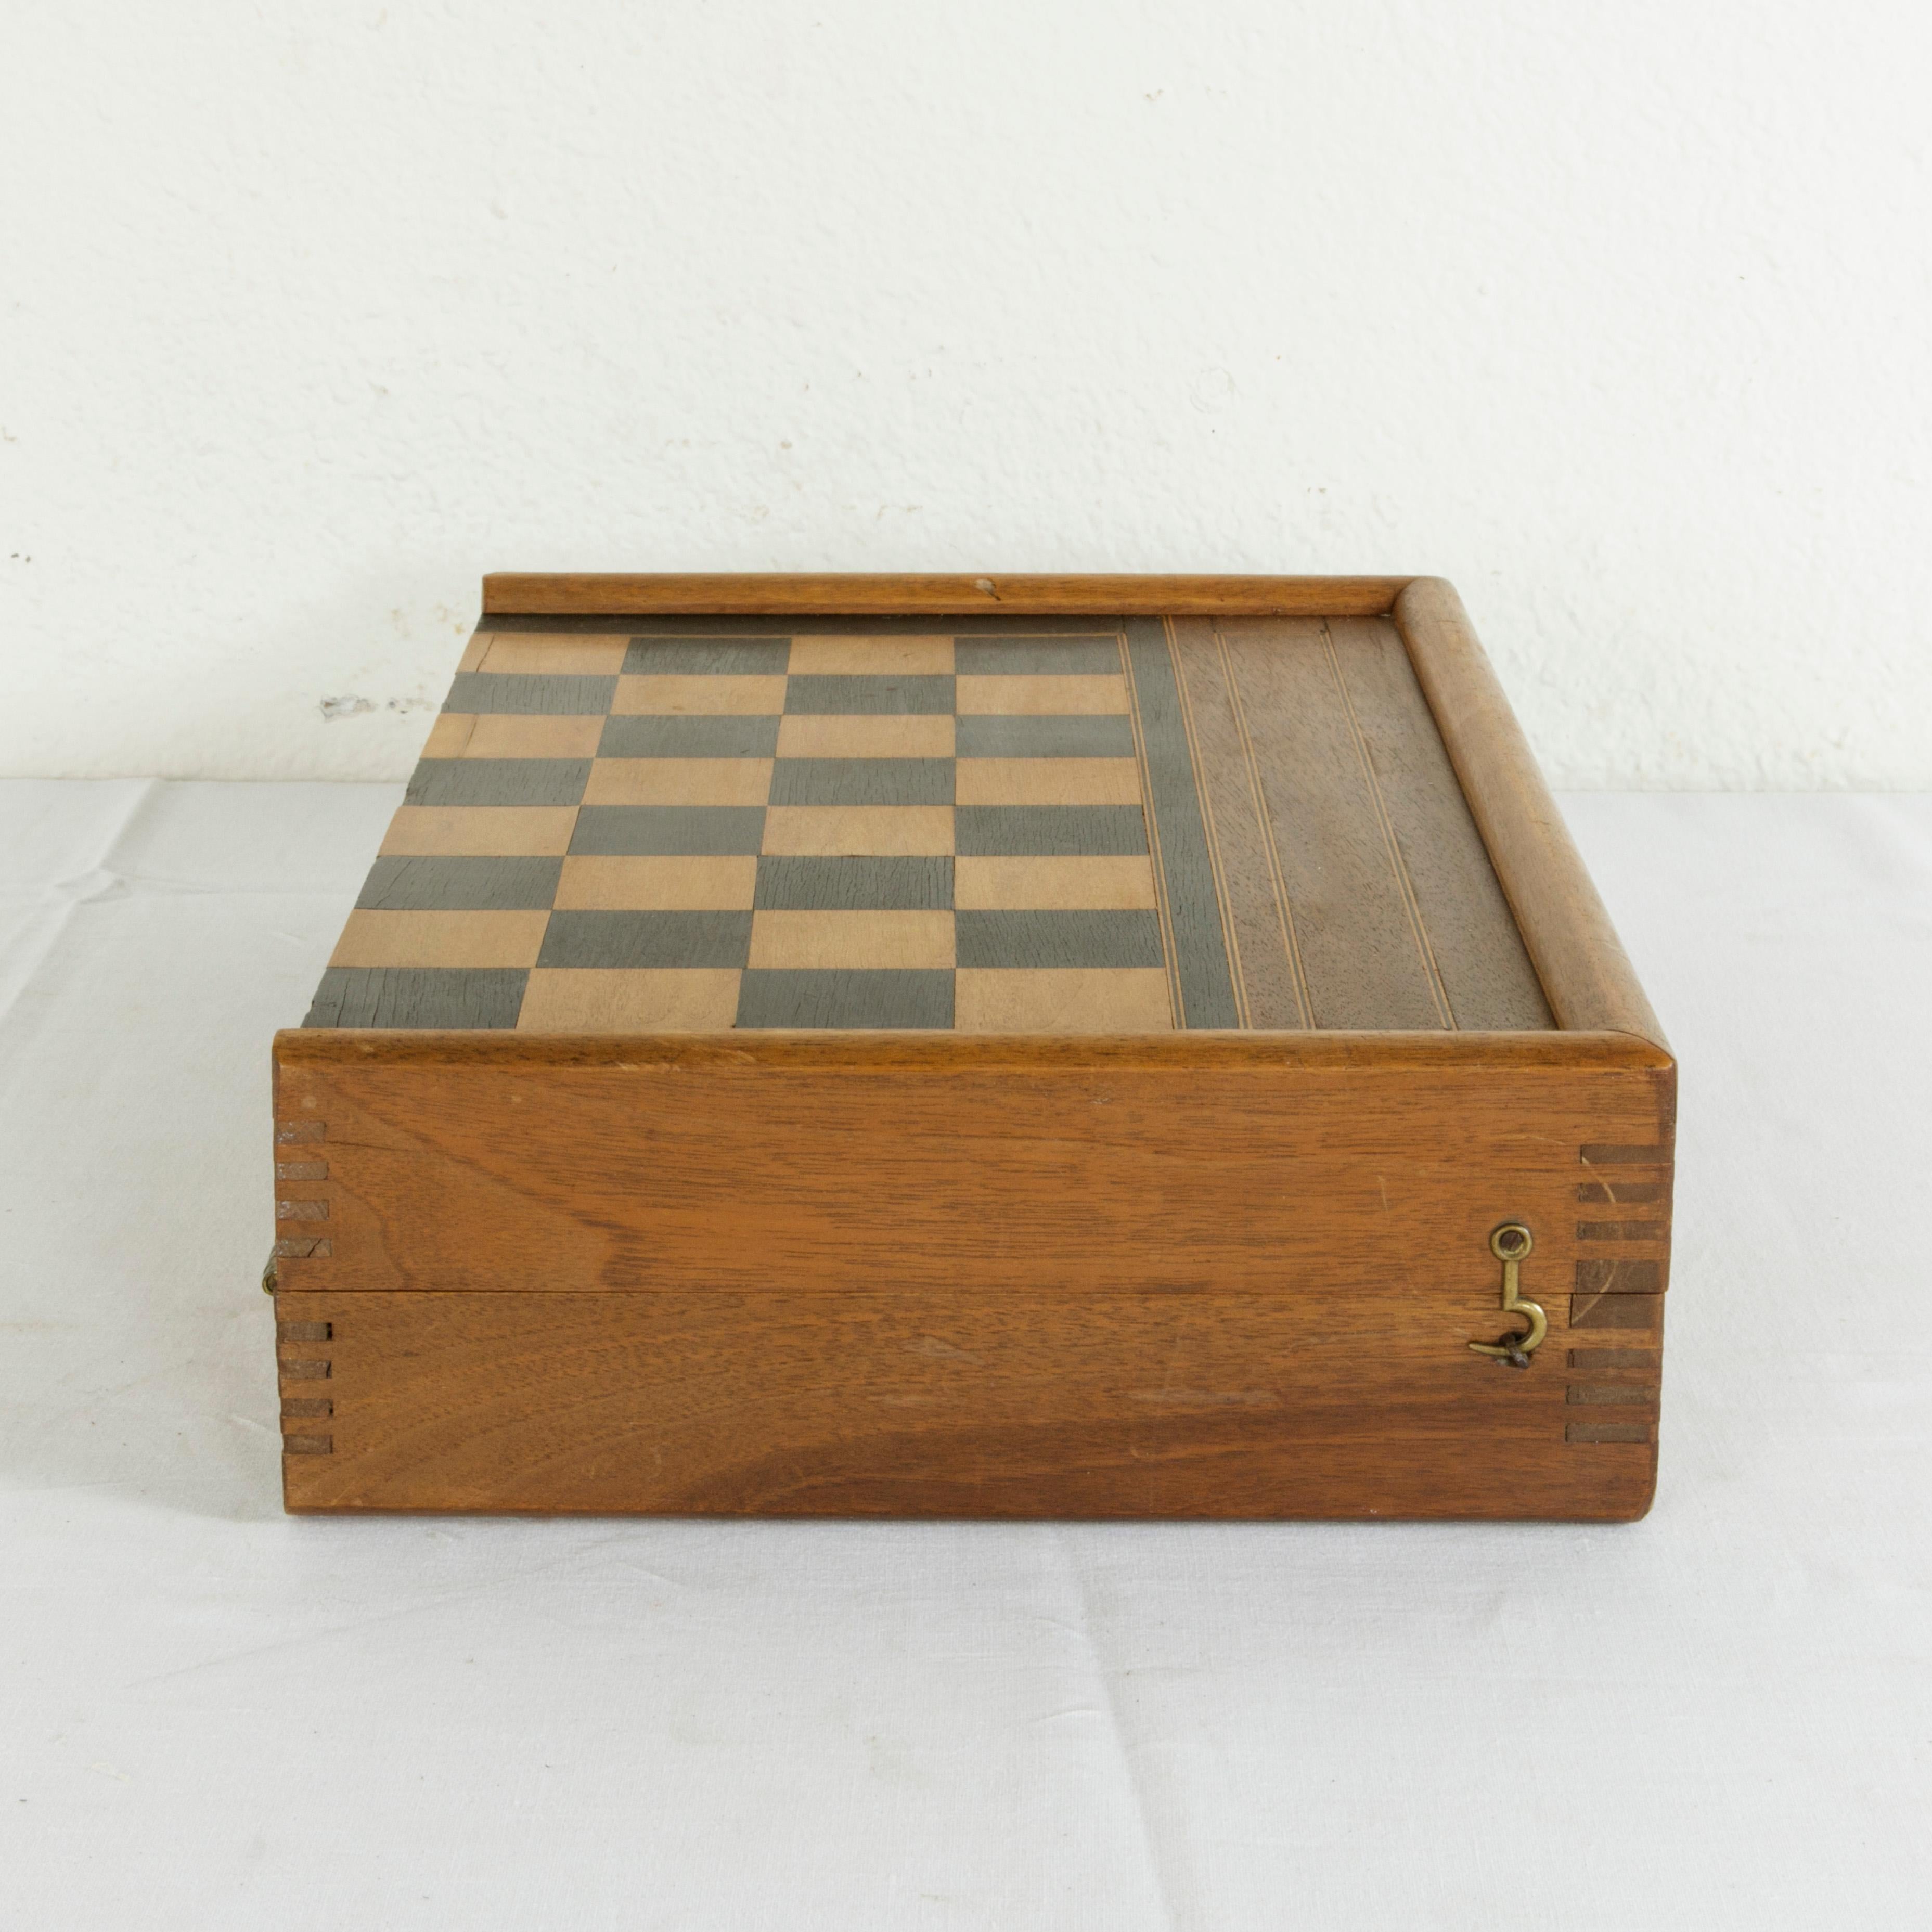 Early 20th Century Walnut Marquetry Folding Game Box, with Reverse Side Backgammon, circa 1900